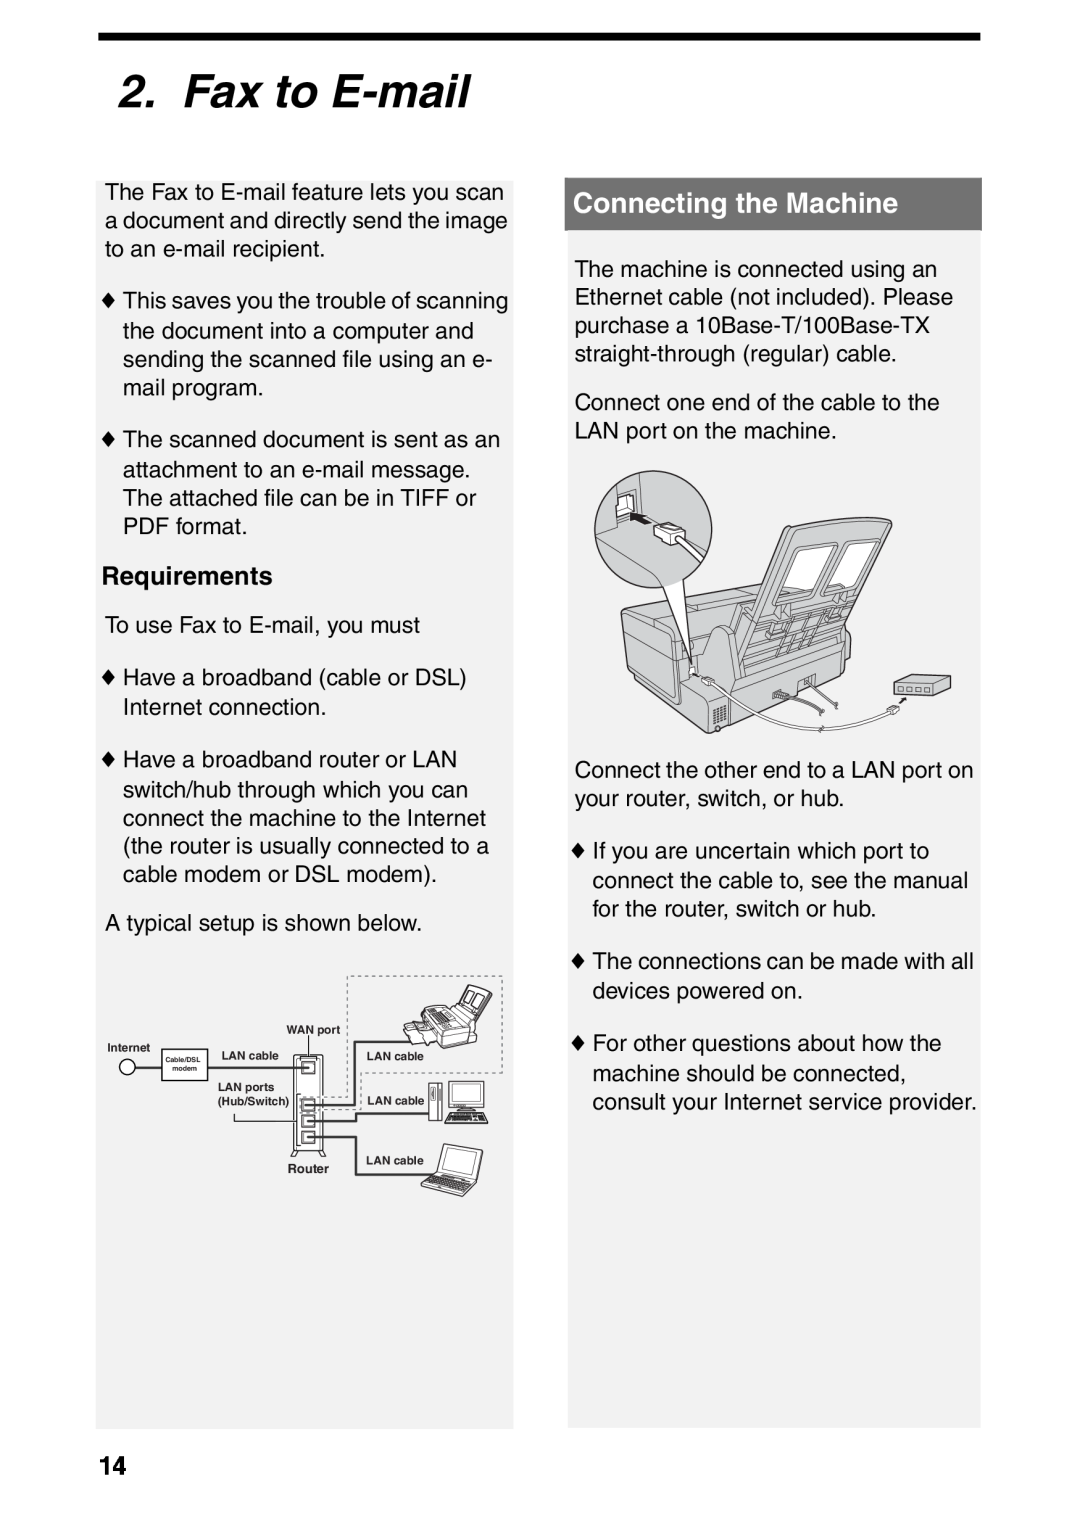 Sharp UX-B800SE operation manual Fax to E-mail, Connecting the Machine 